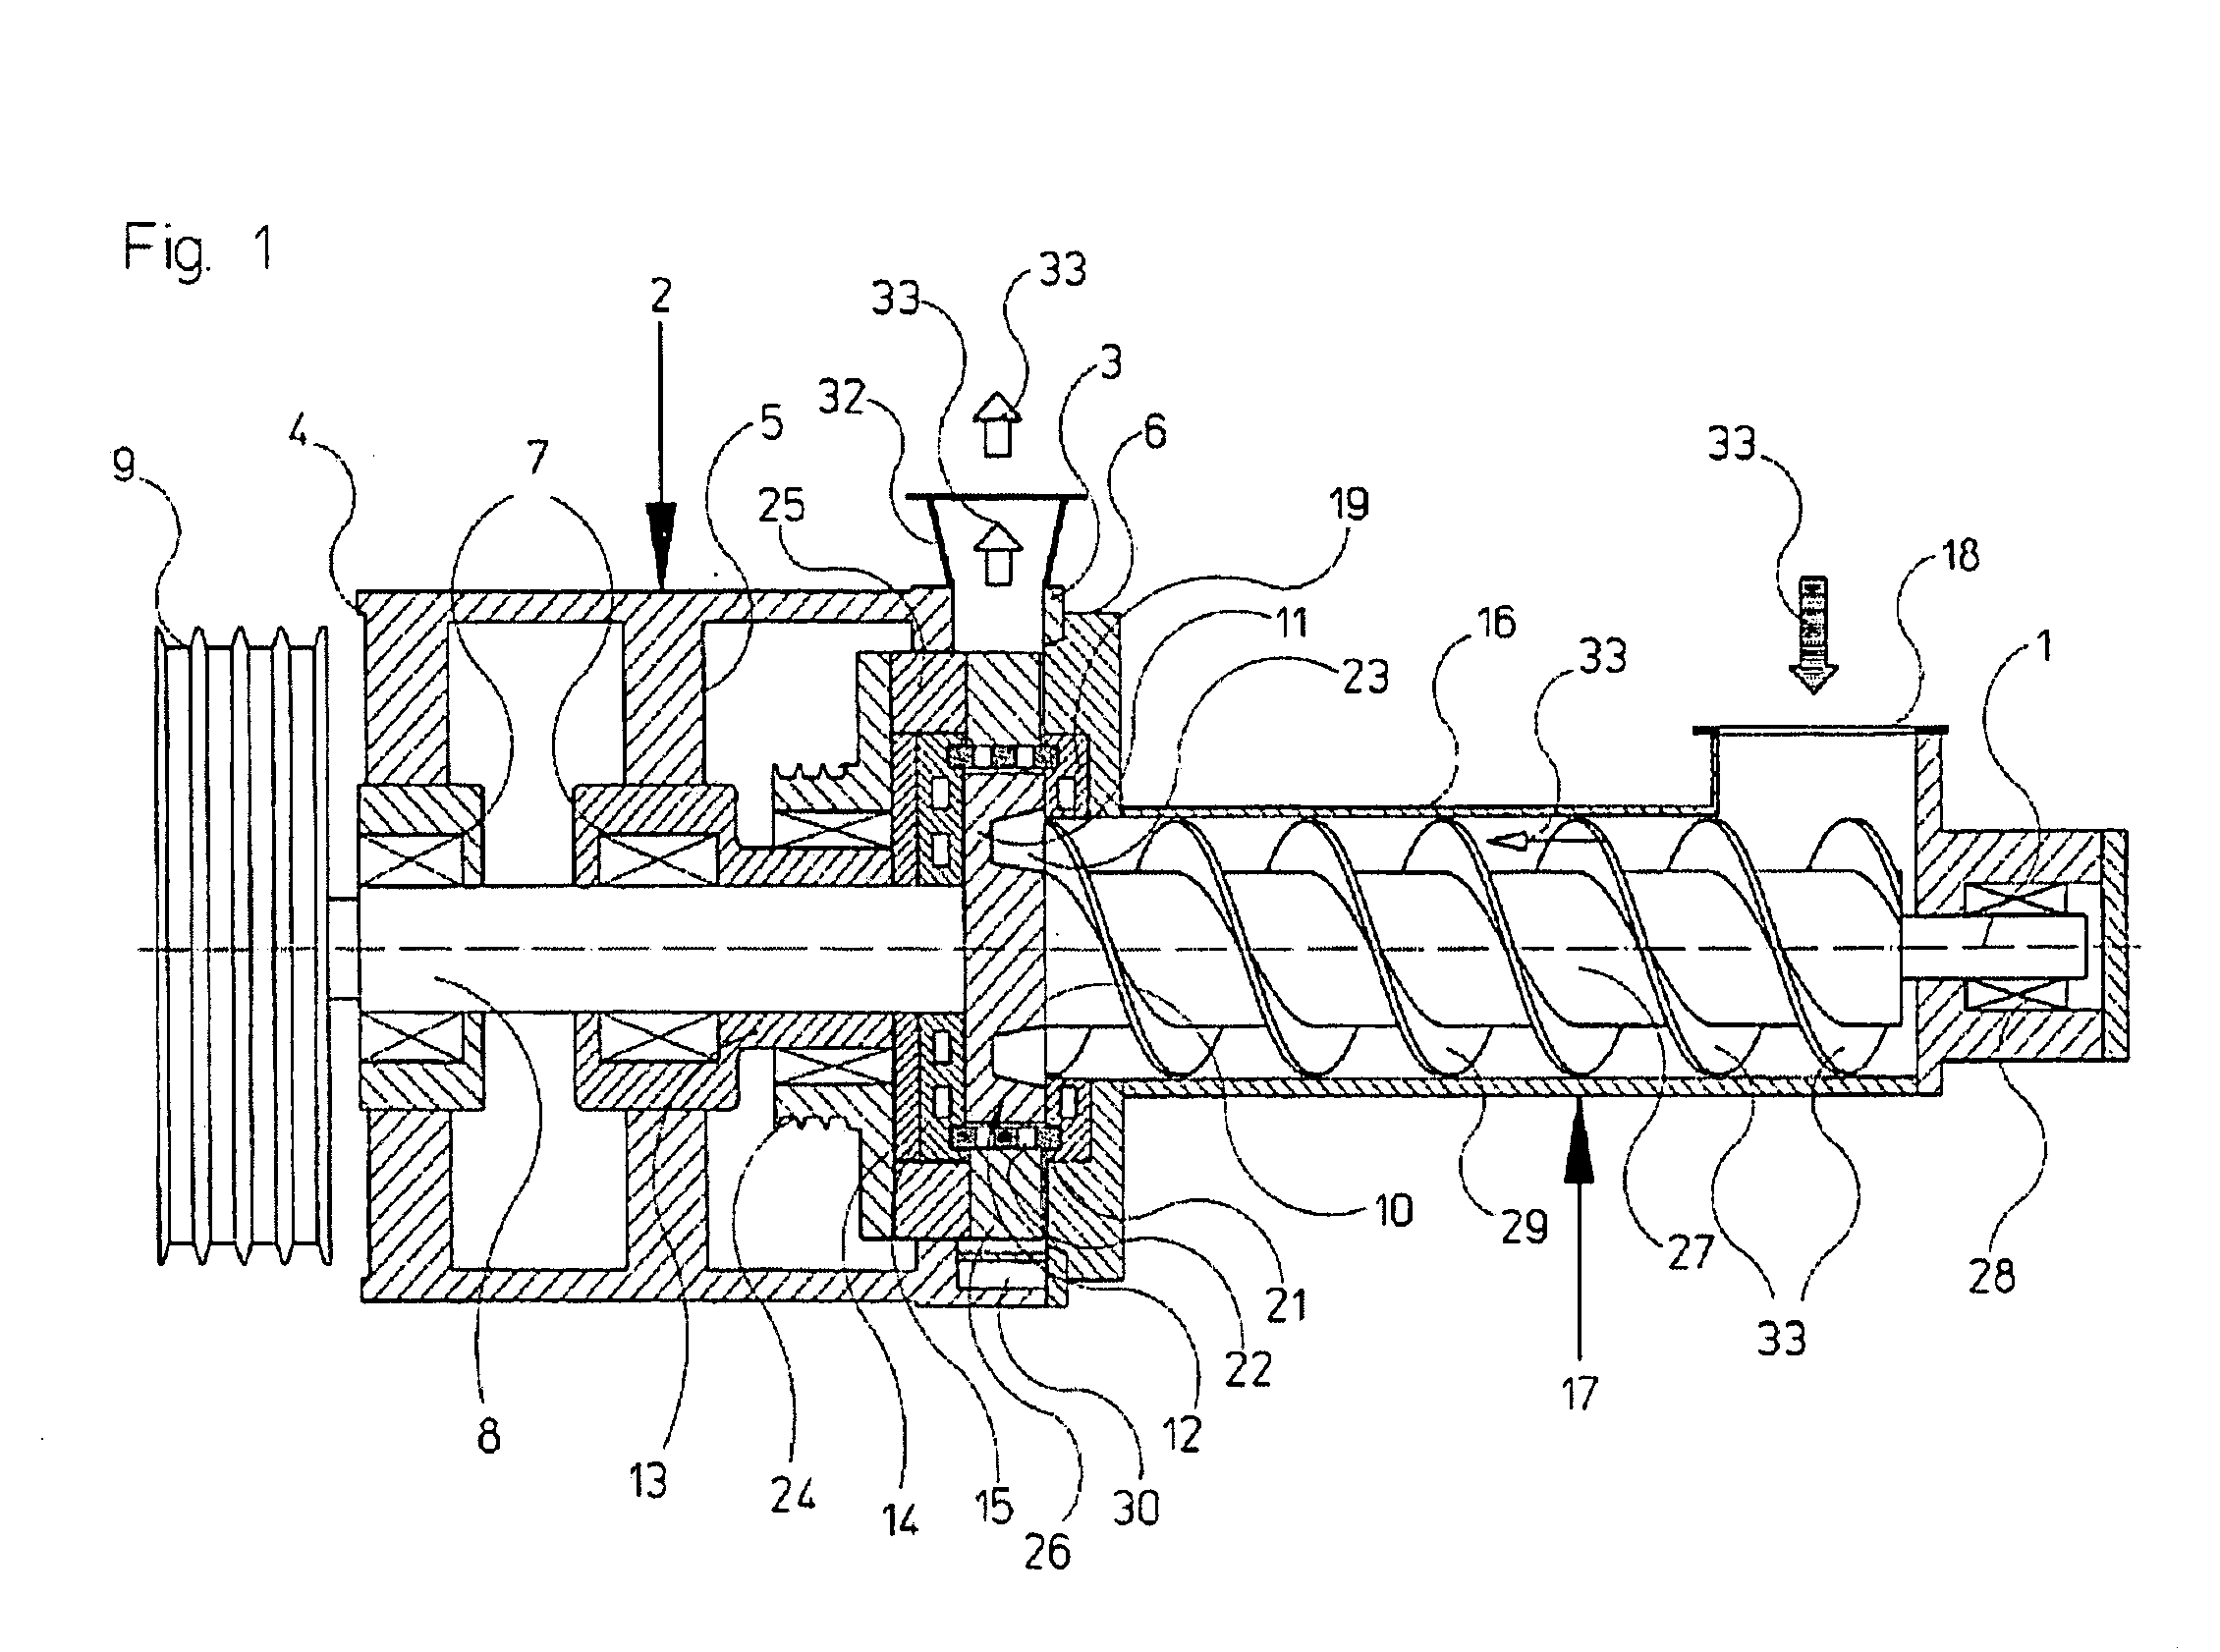 Apparatus for converting free-flowing, at least partially thermoplastic feed material, into granules, agglomerates, pellets, compacts, and the like